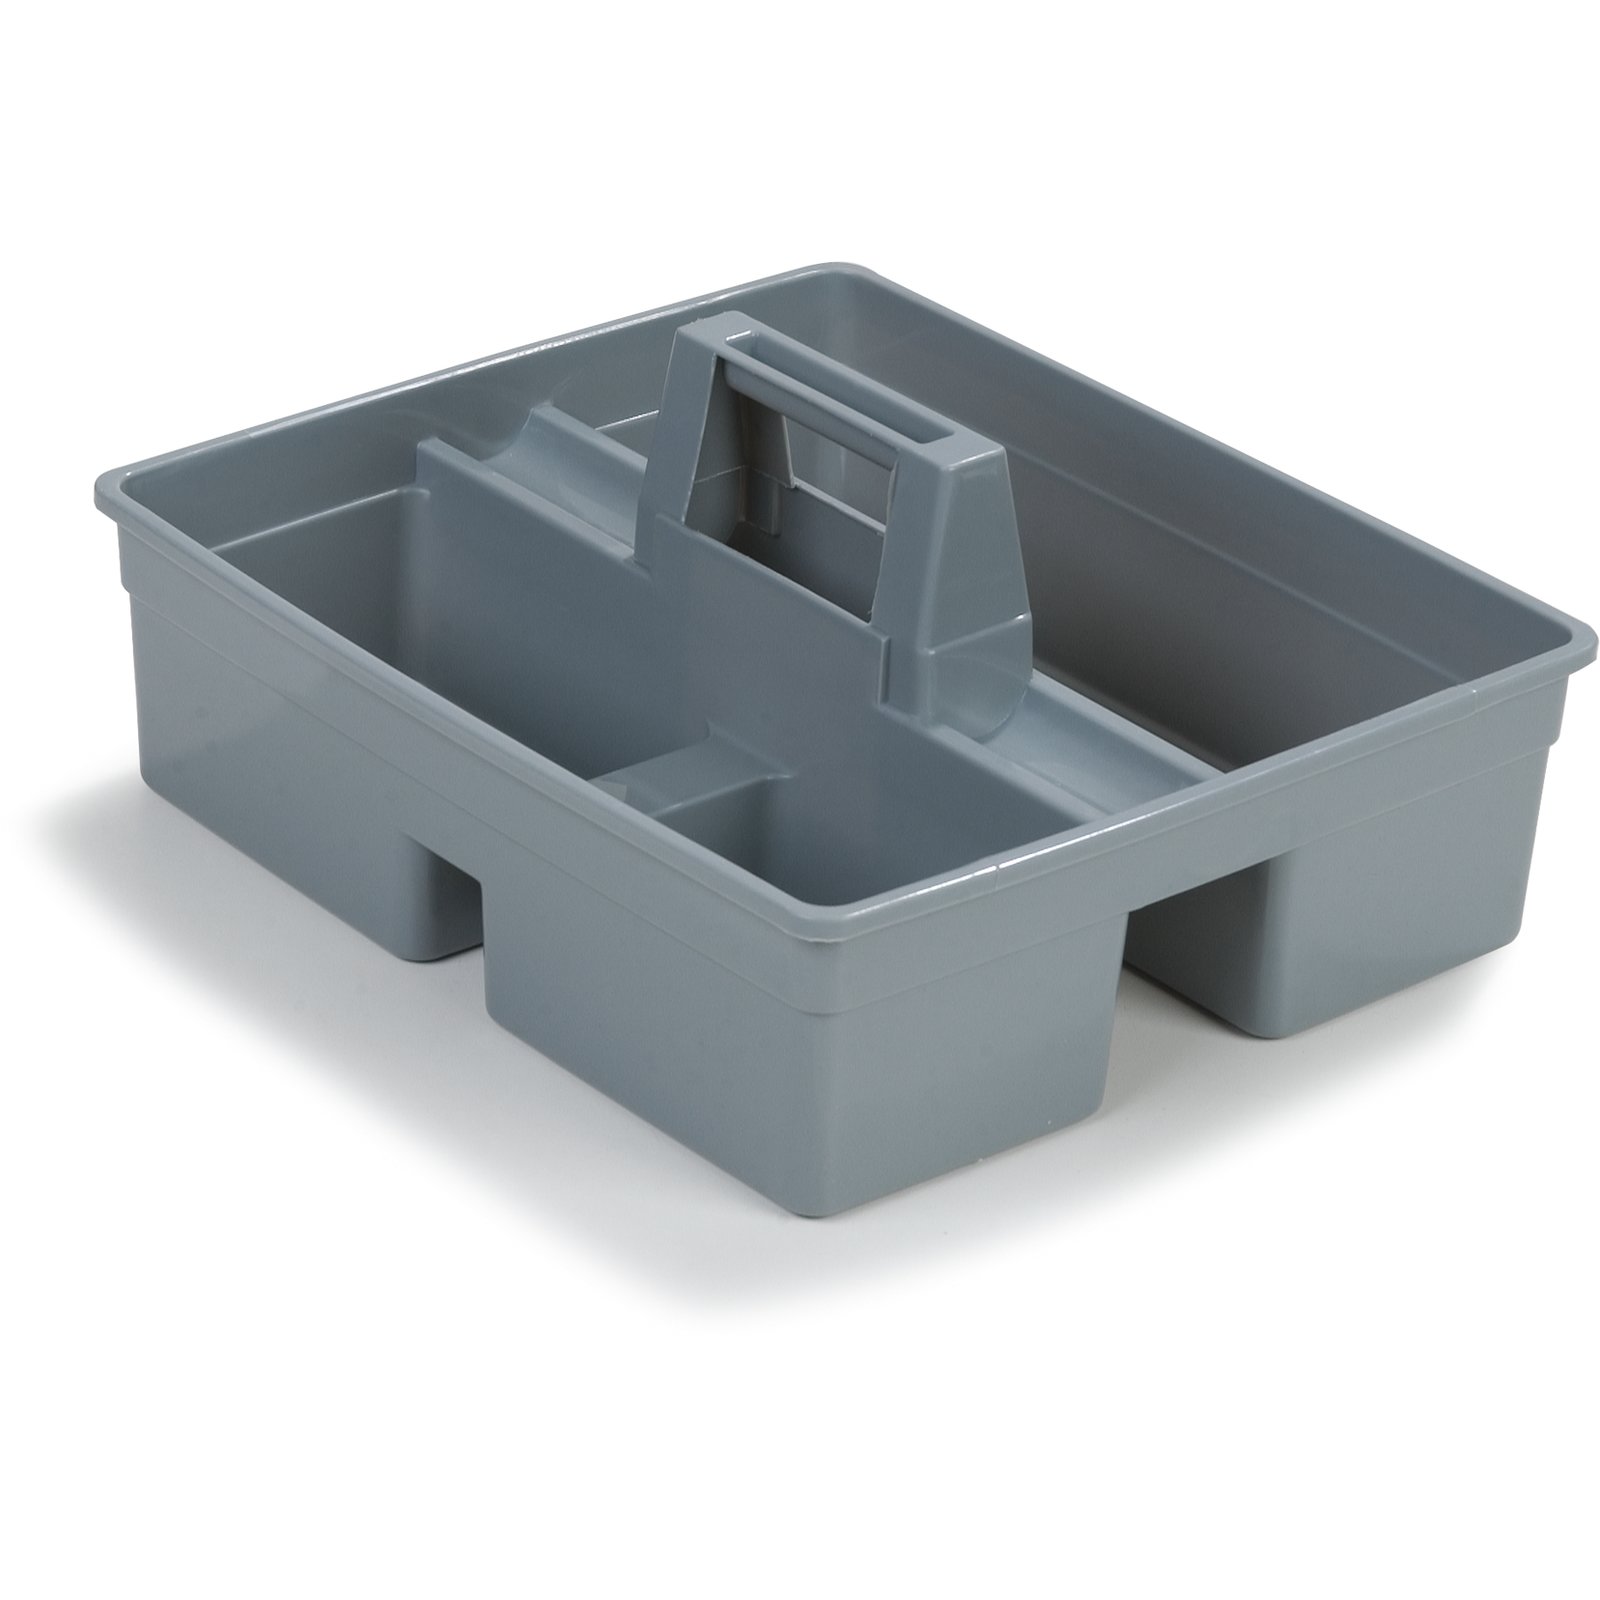 3-Compartment Tool Caddy for Janitorial Cart - Gray